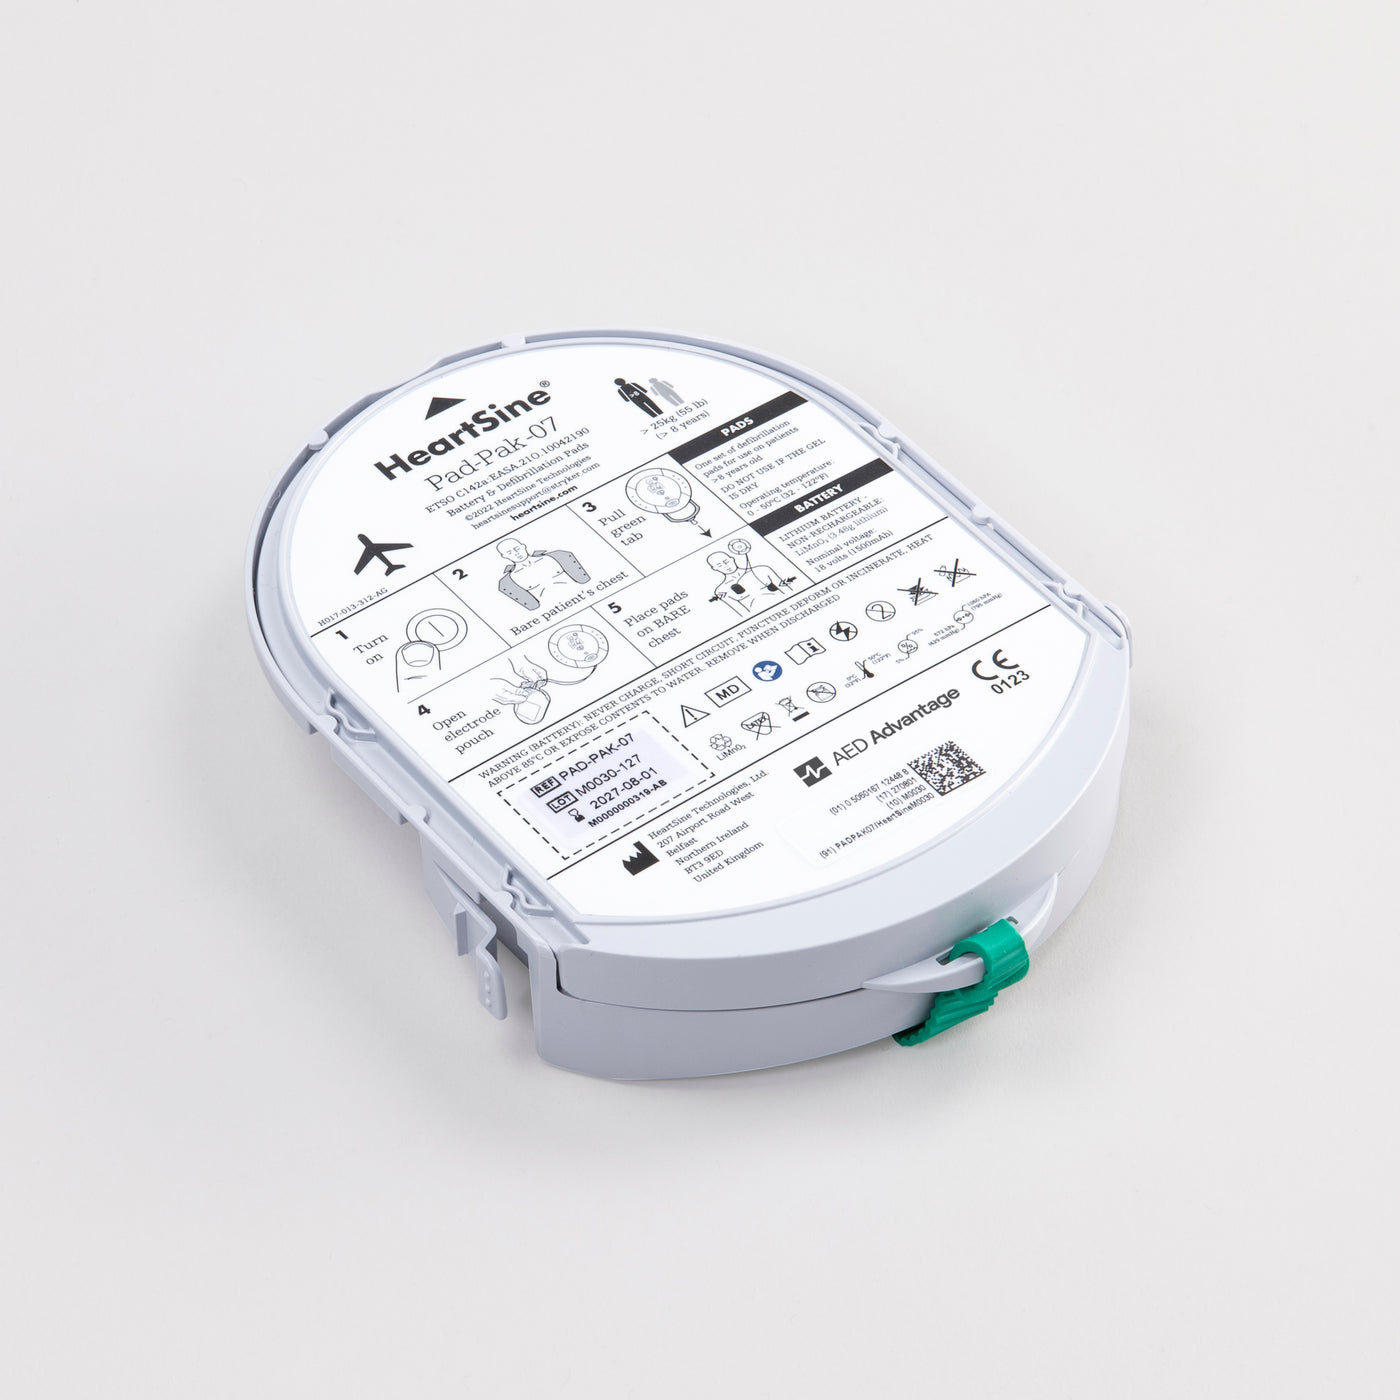 White adult aviation pads and battery cartridge for the HeartSine defibrillator